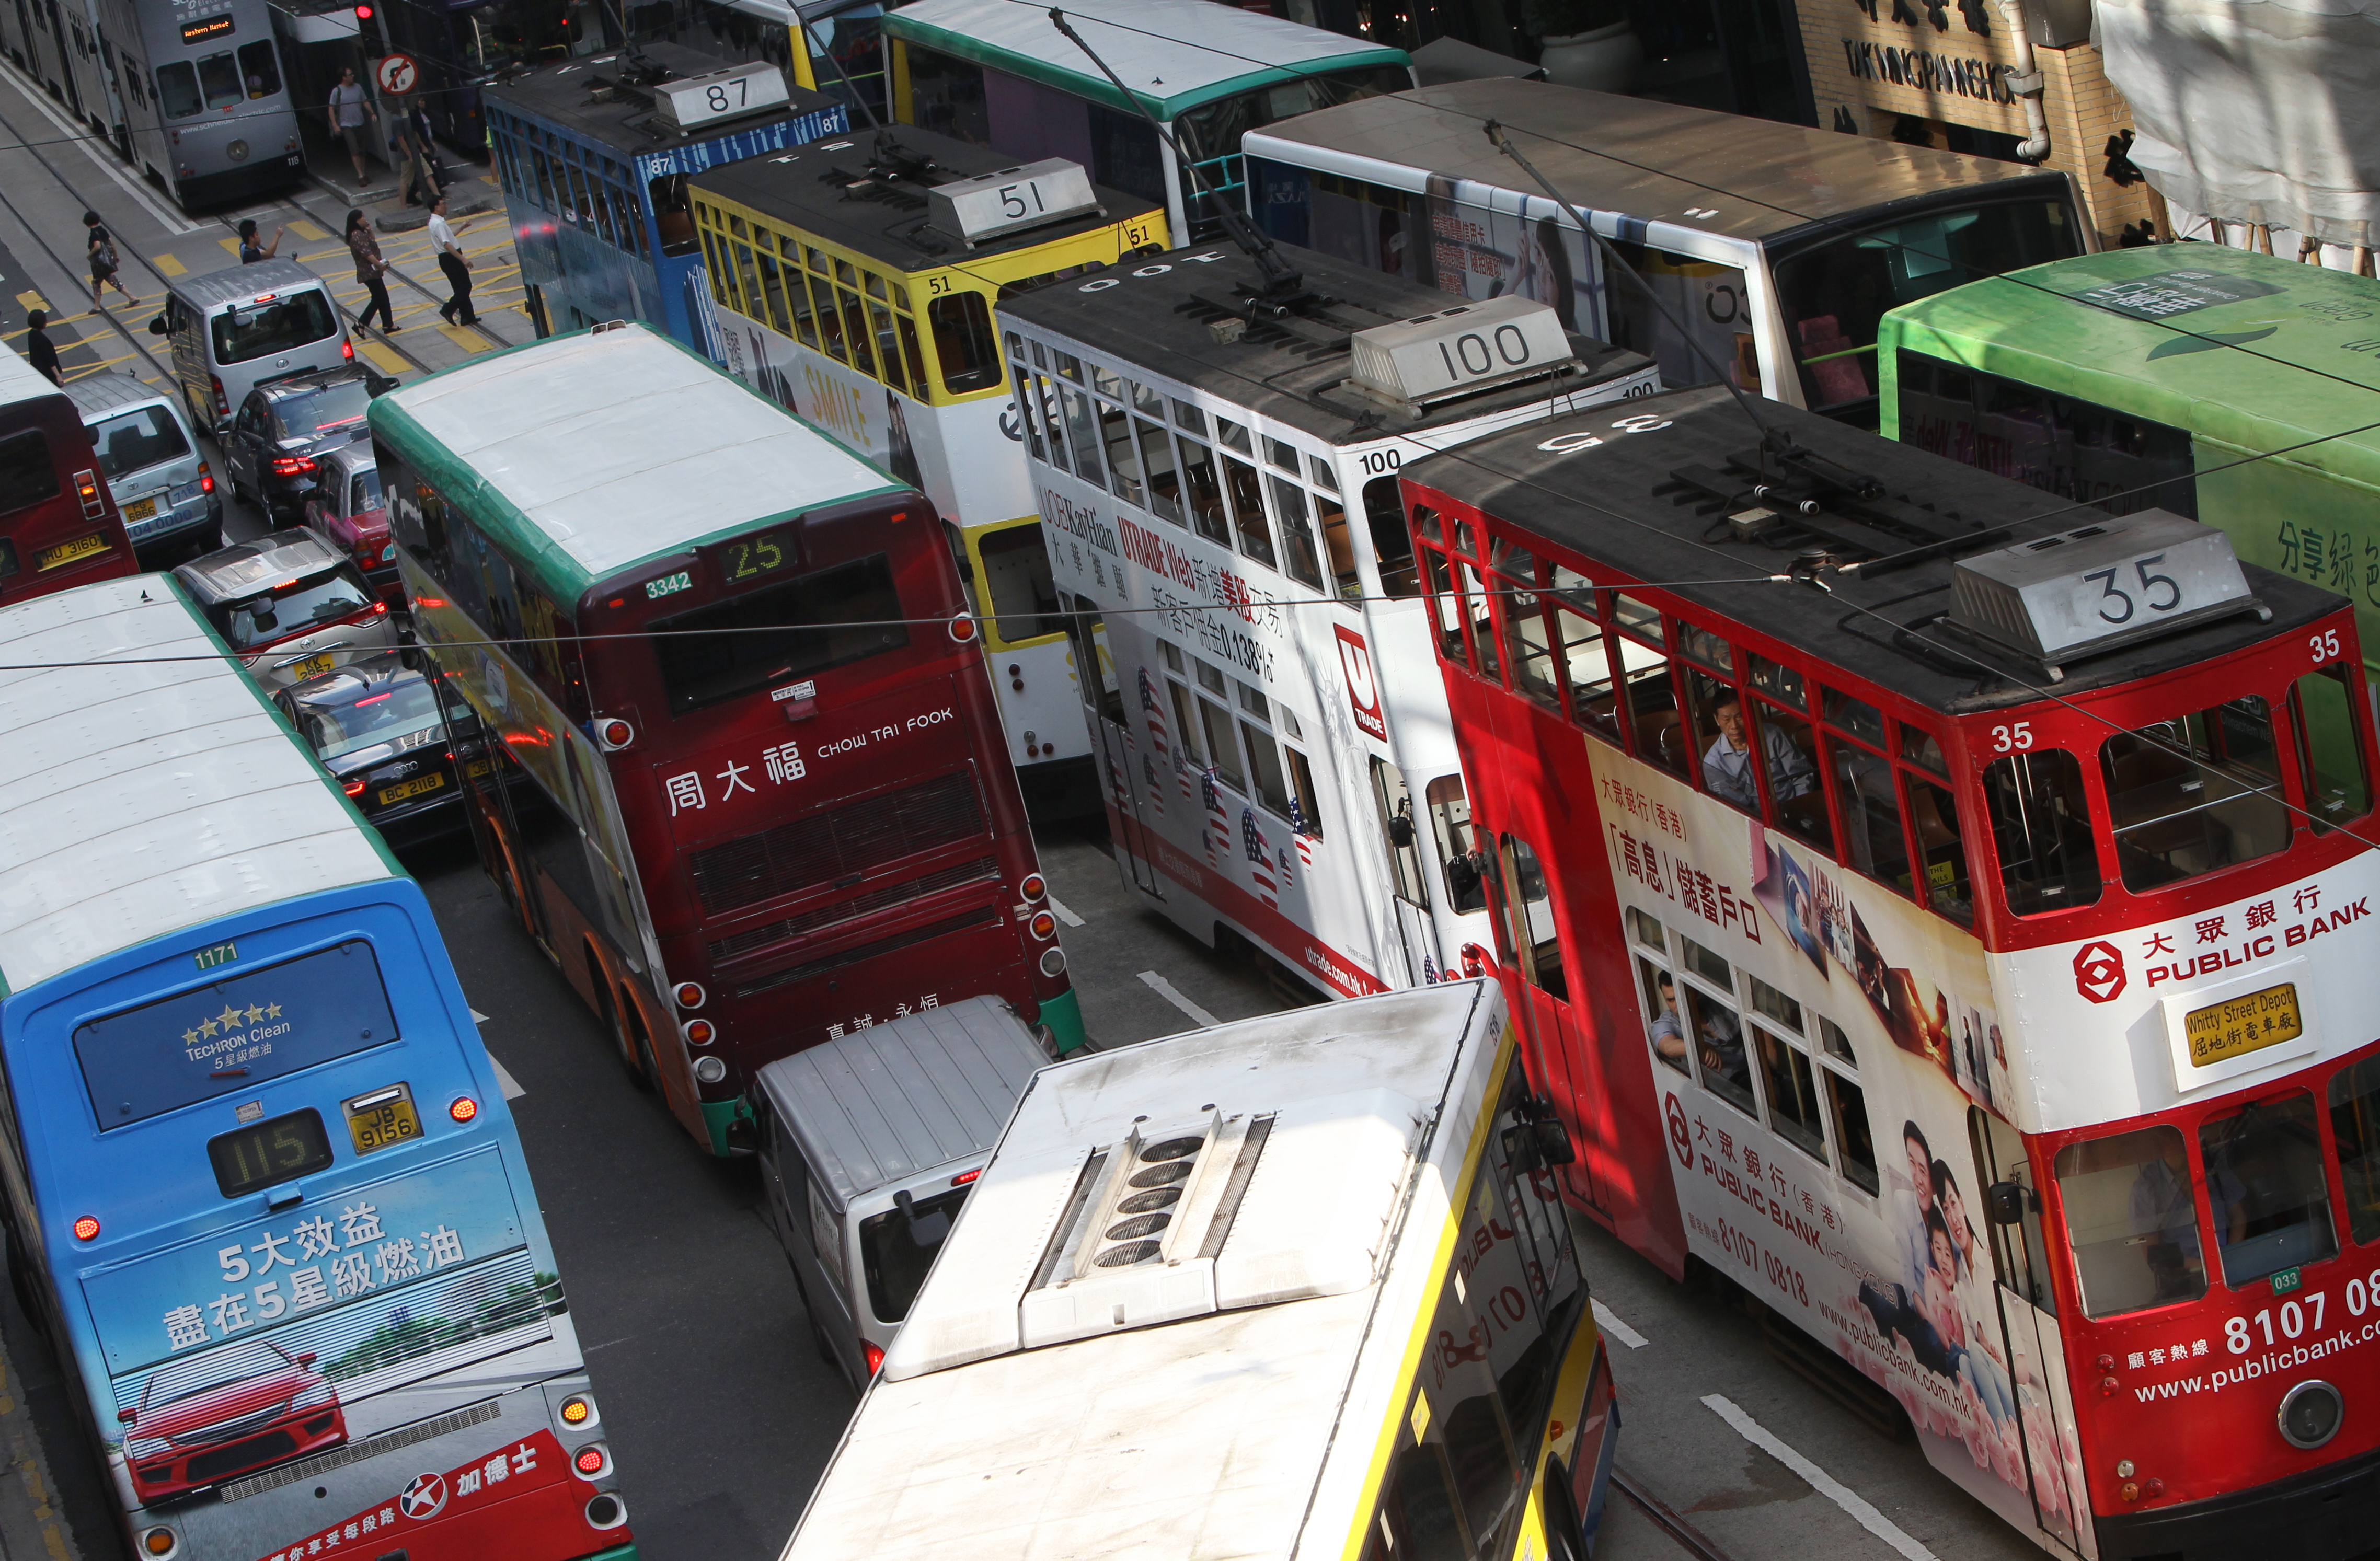 Minibuses and buses carry 71 per cent of total daily passenger boardings, but account for only 5 to 25 per cent of traffic on major roads. Photo: David Wong